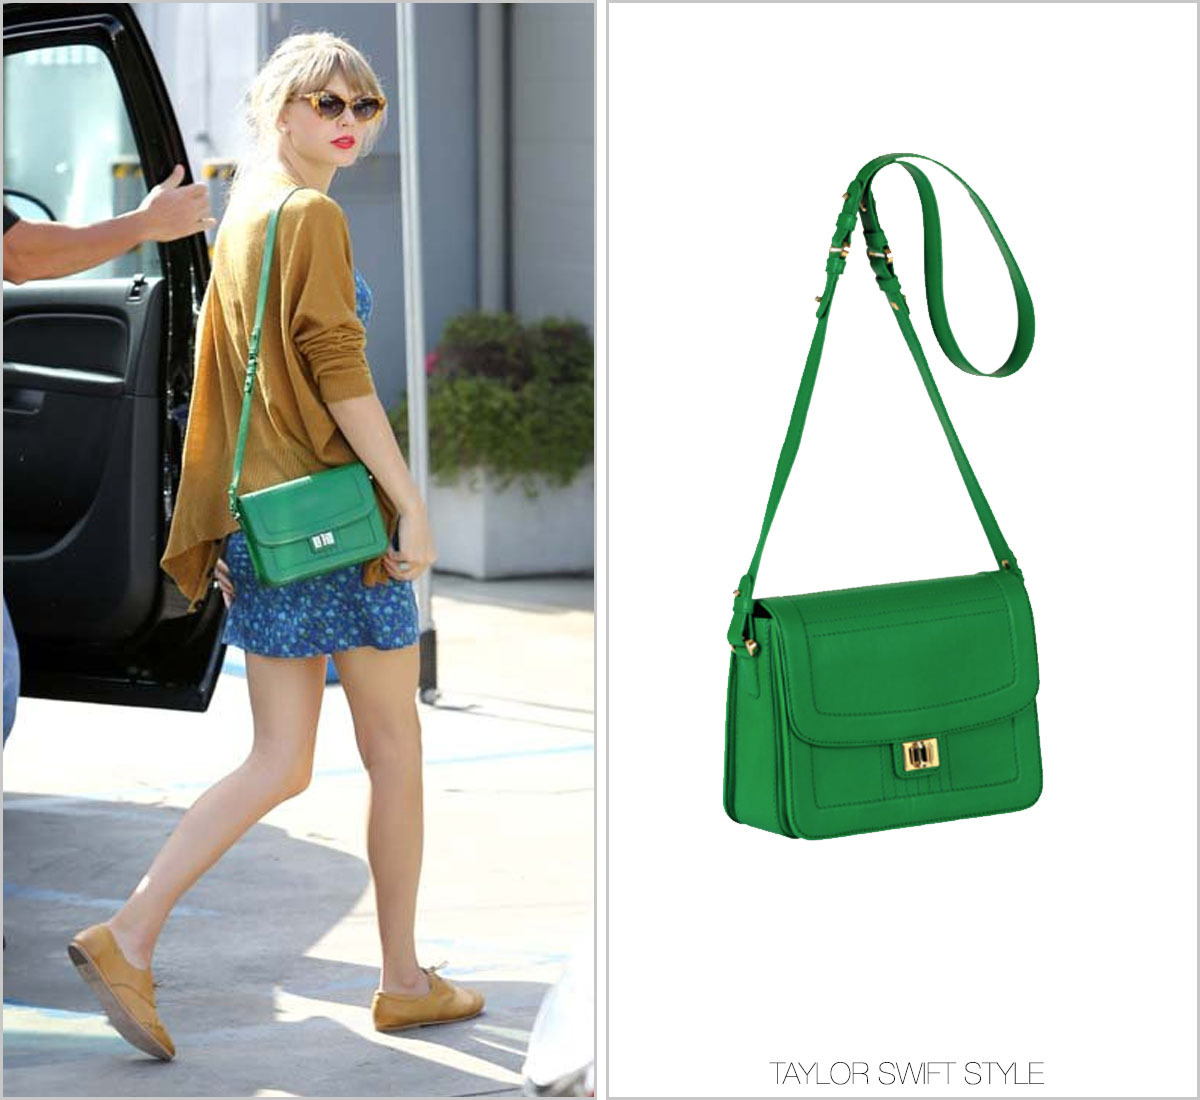 Taylor Swift Totes Her Elie Saab Bag: Photo 2667345, Taylor Swift Photos